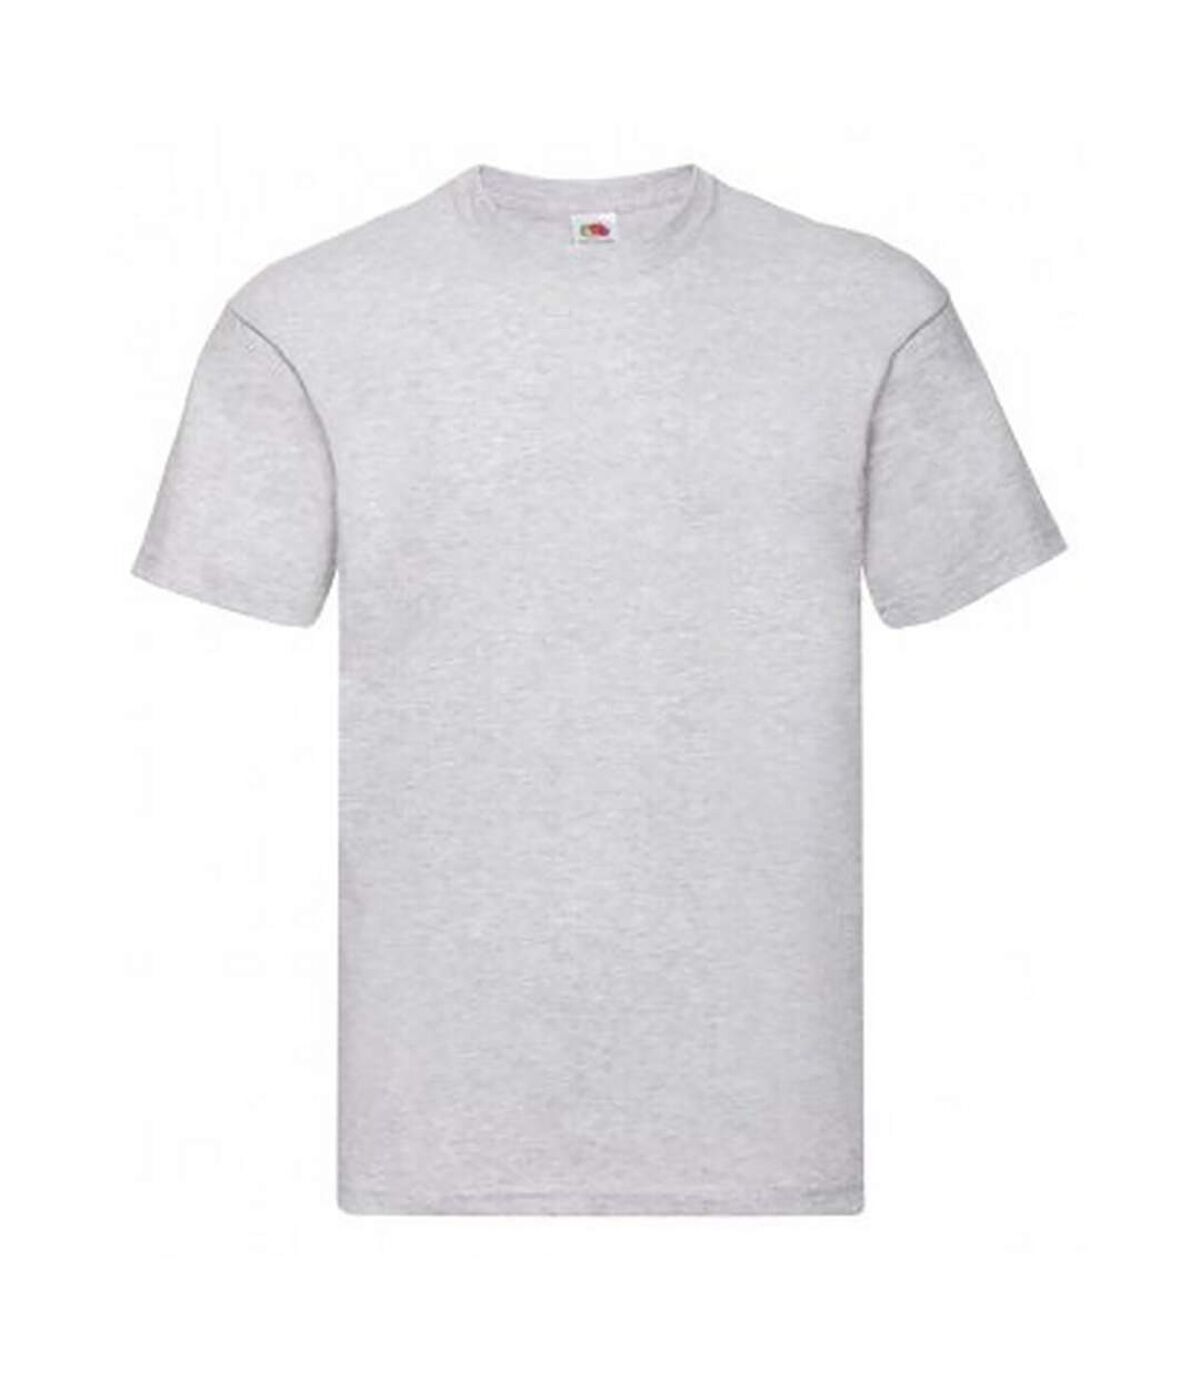 Fruit Of The Loom  - T-shirt manches courtes - Homme (Gris chiné) - UTPC124